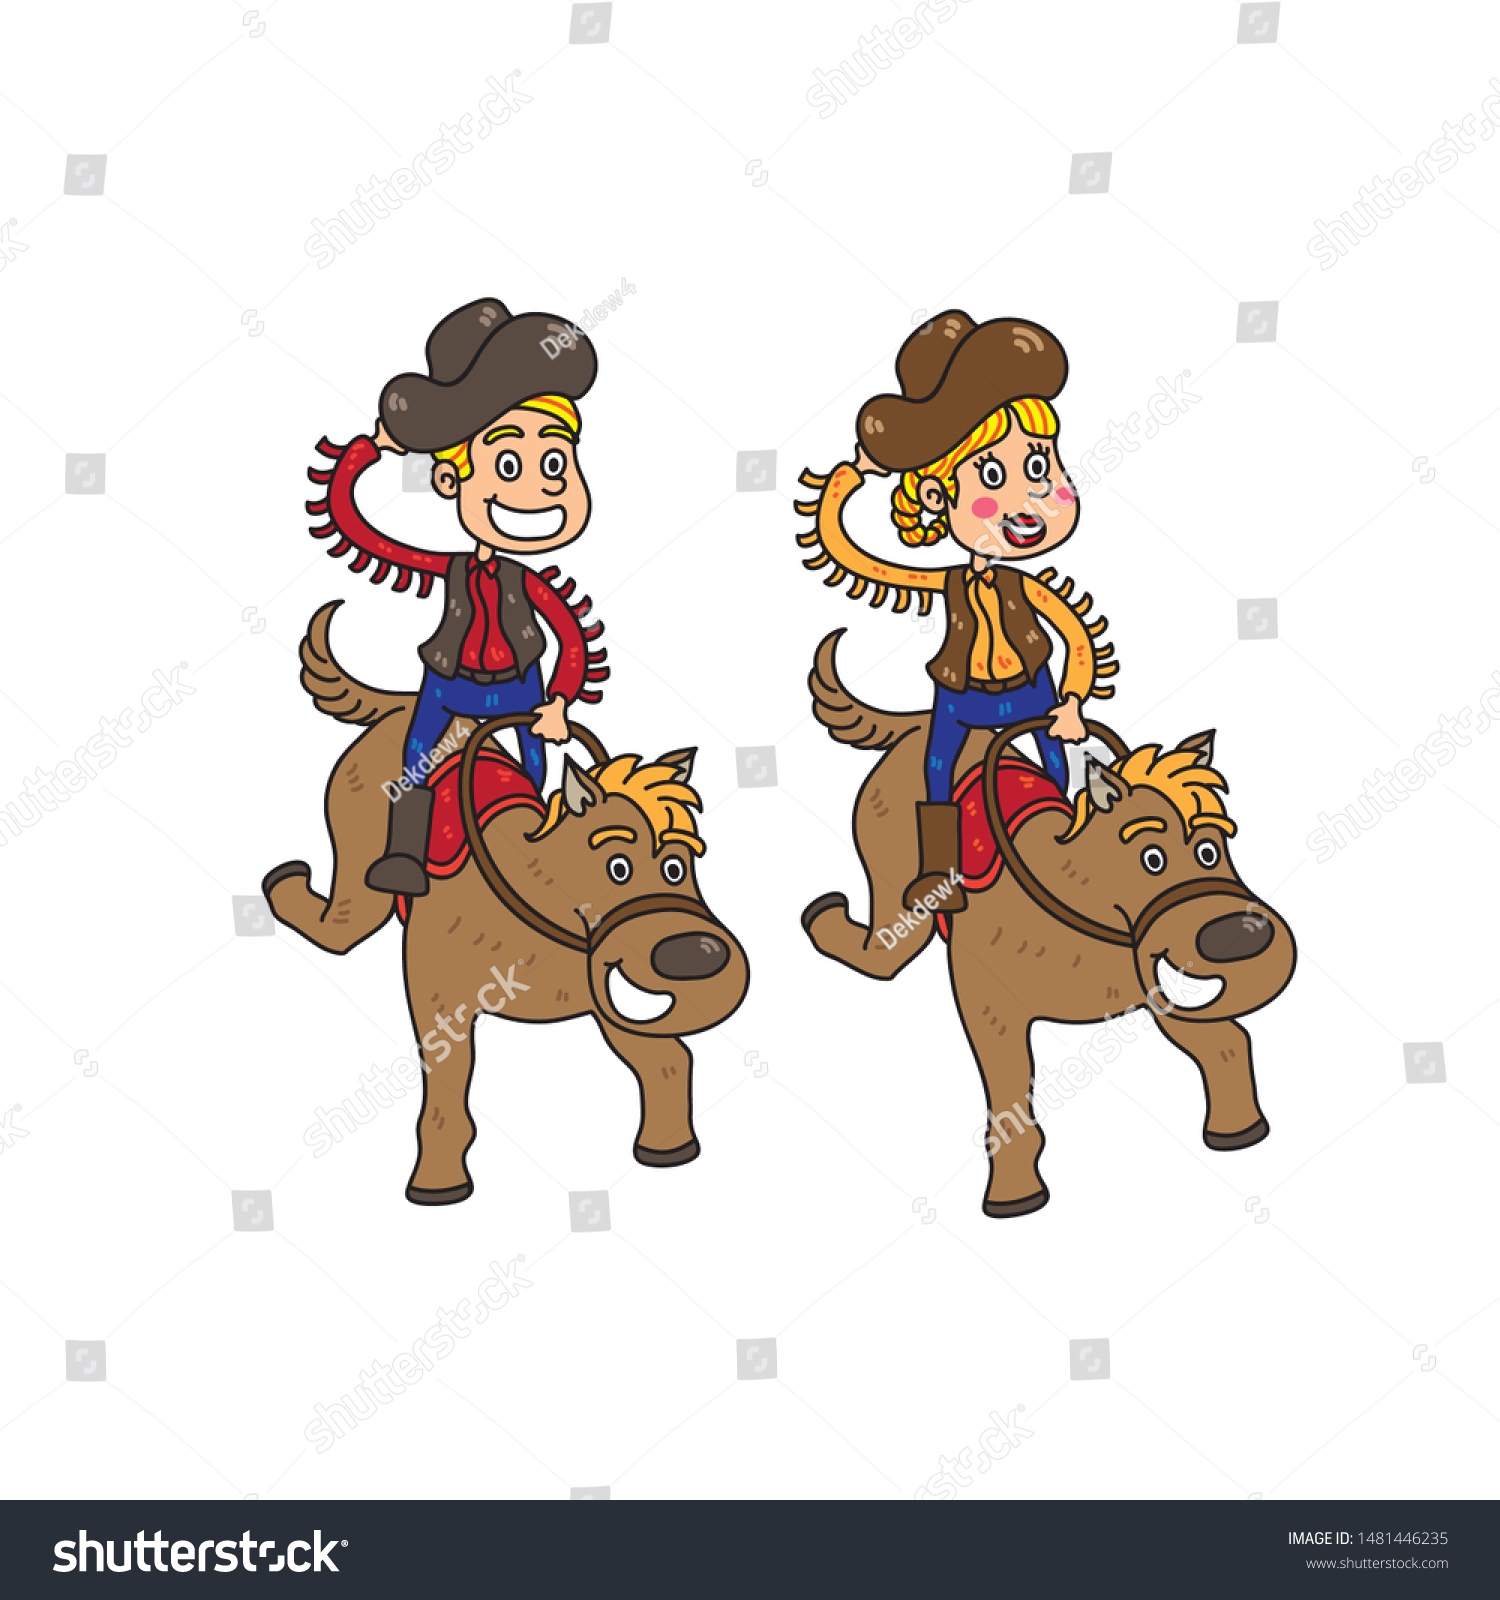 anna jovanovic recommends cowboy and cowgirl cartoon pic